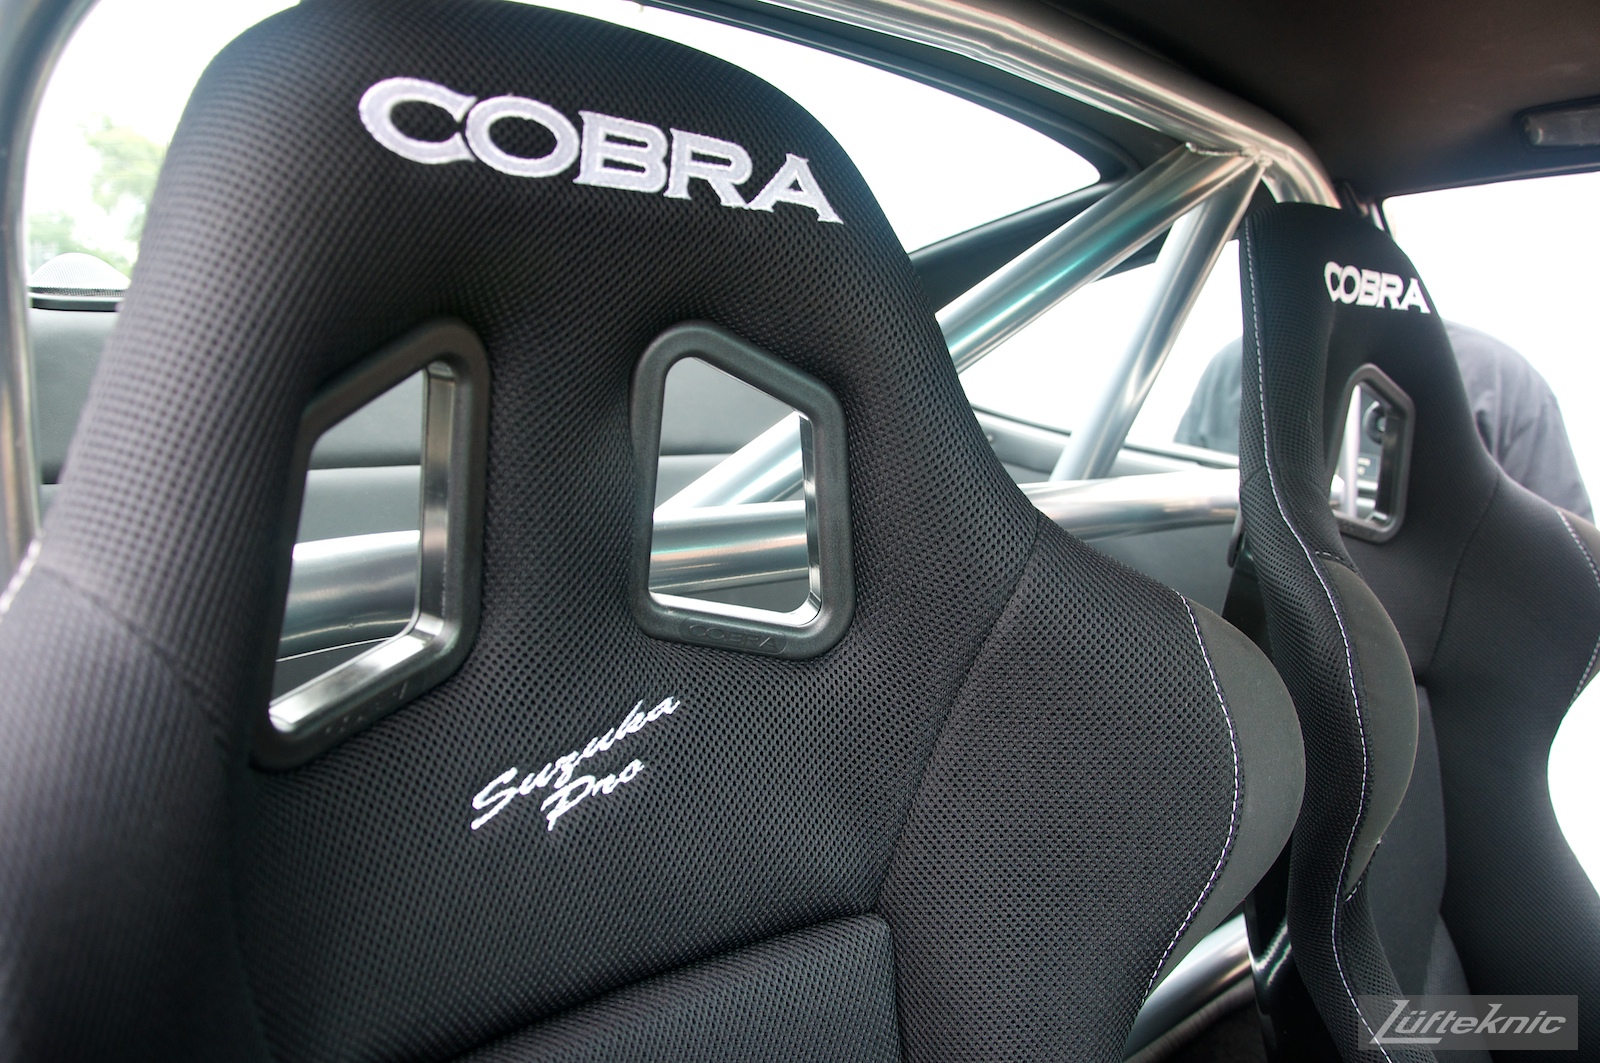 Cobra seats and roll bar mounted in a black 993 Porsche Turbo.